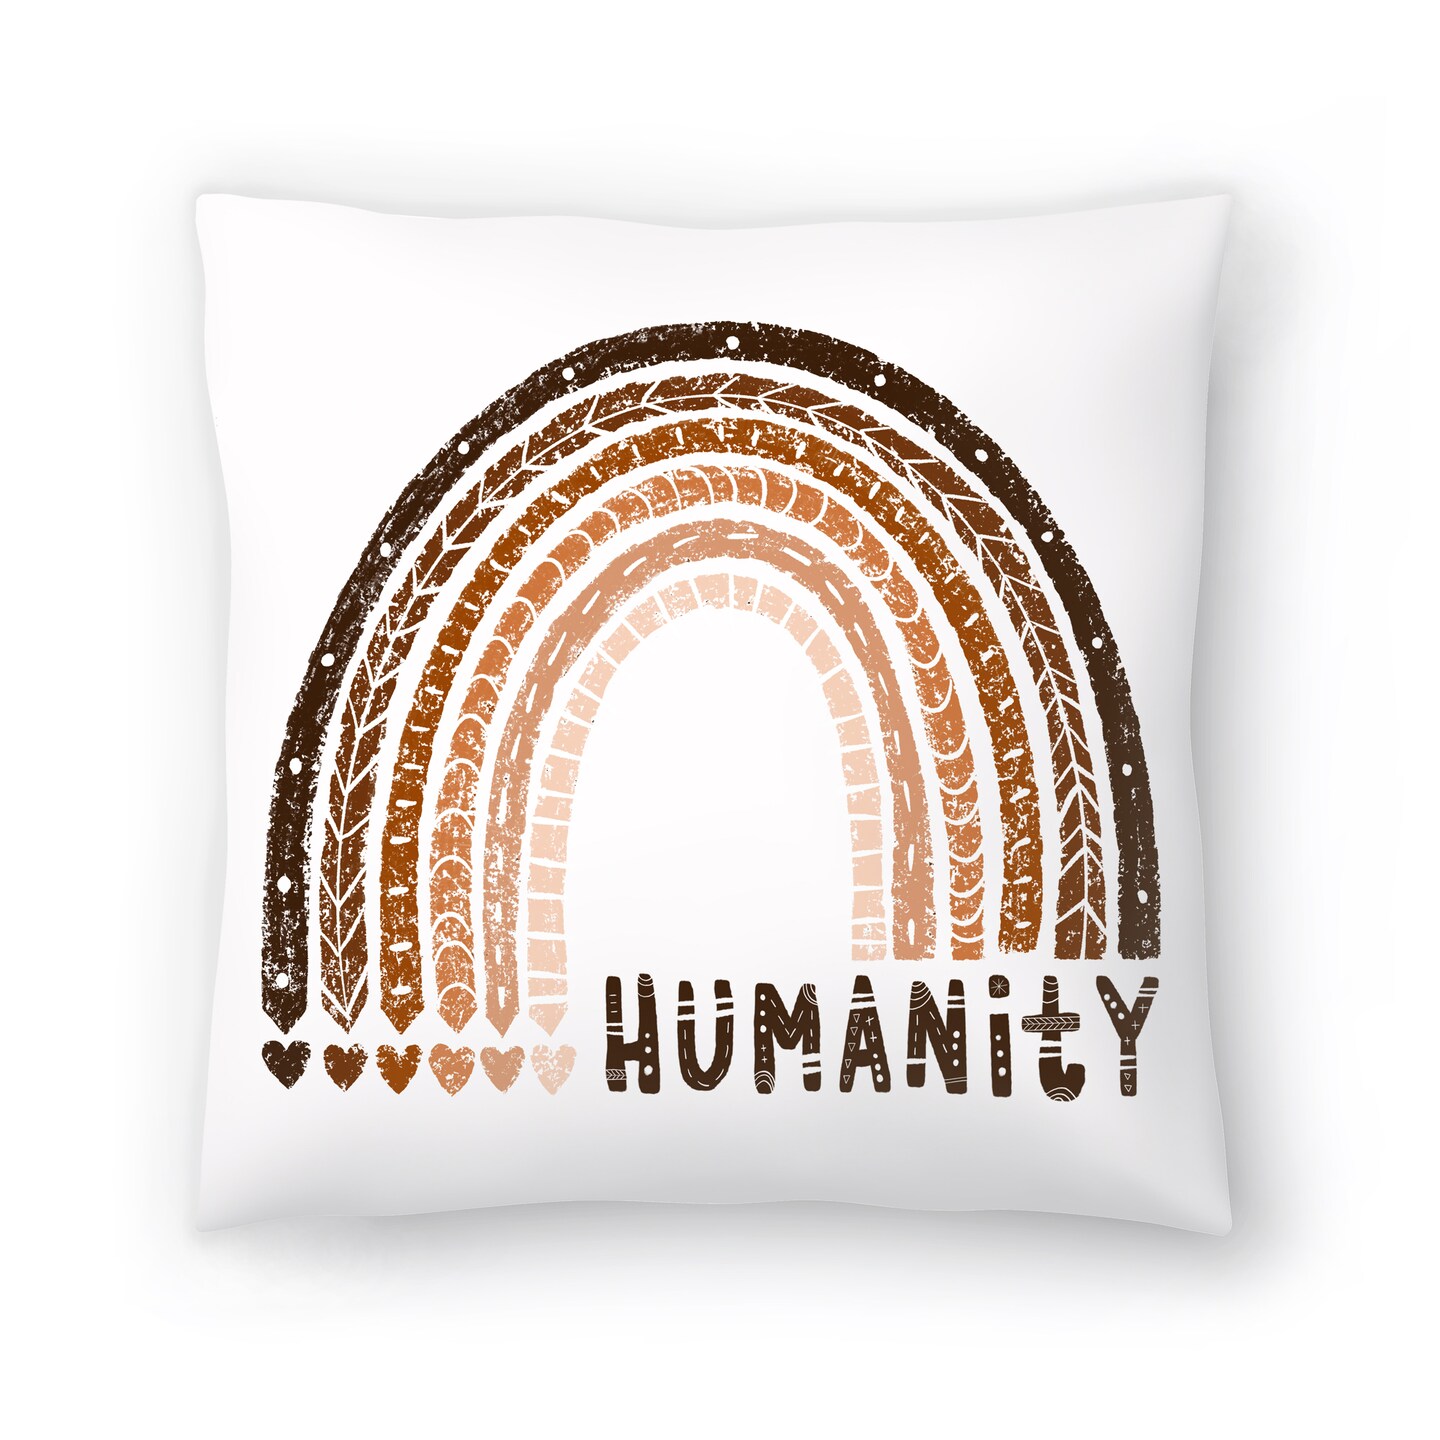 Humanity by Emiko Rainbow Throw Pillow - Americanflat